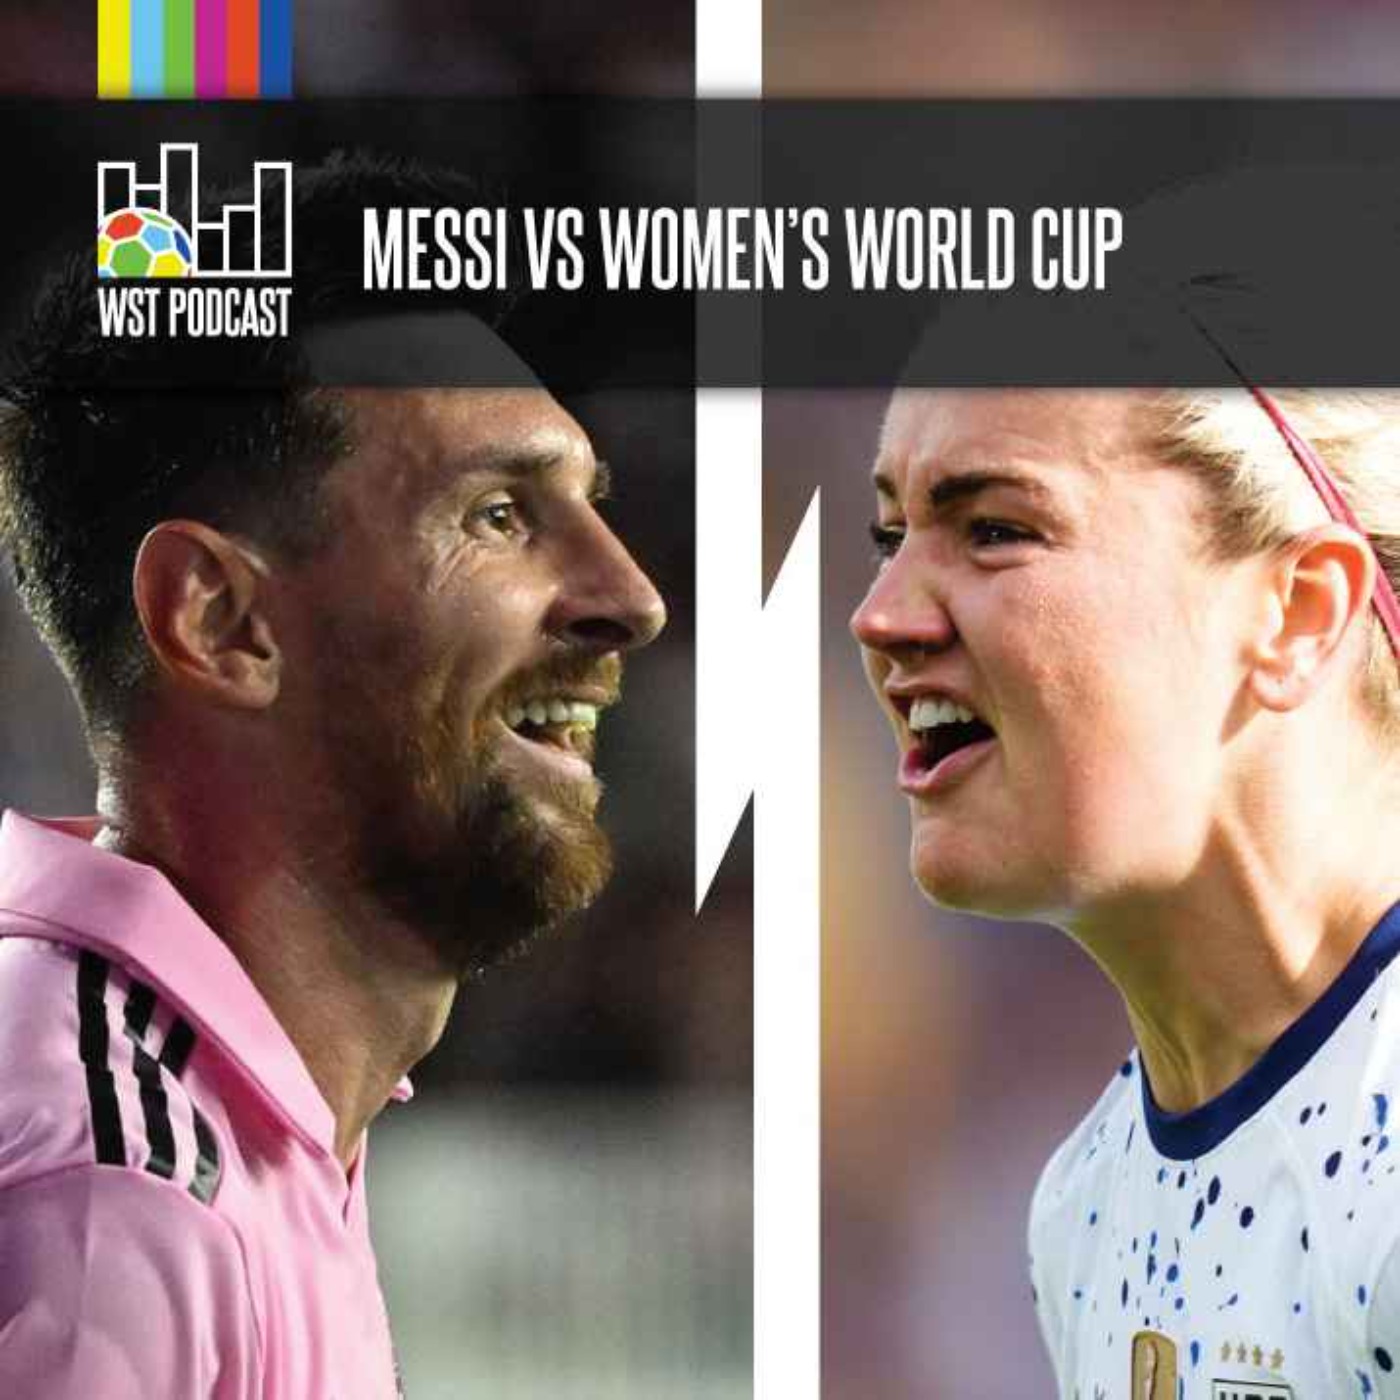 Messi vs Women's World Cup: Choose one